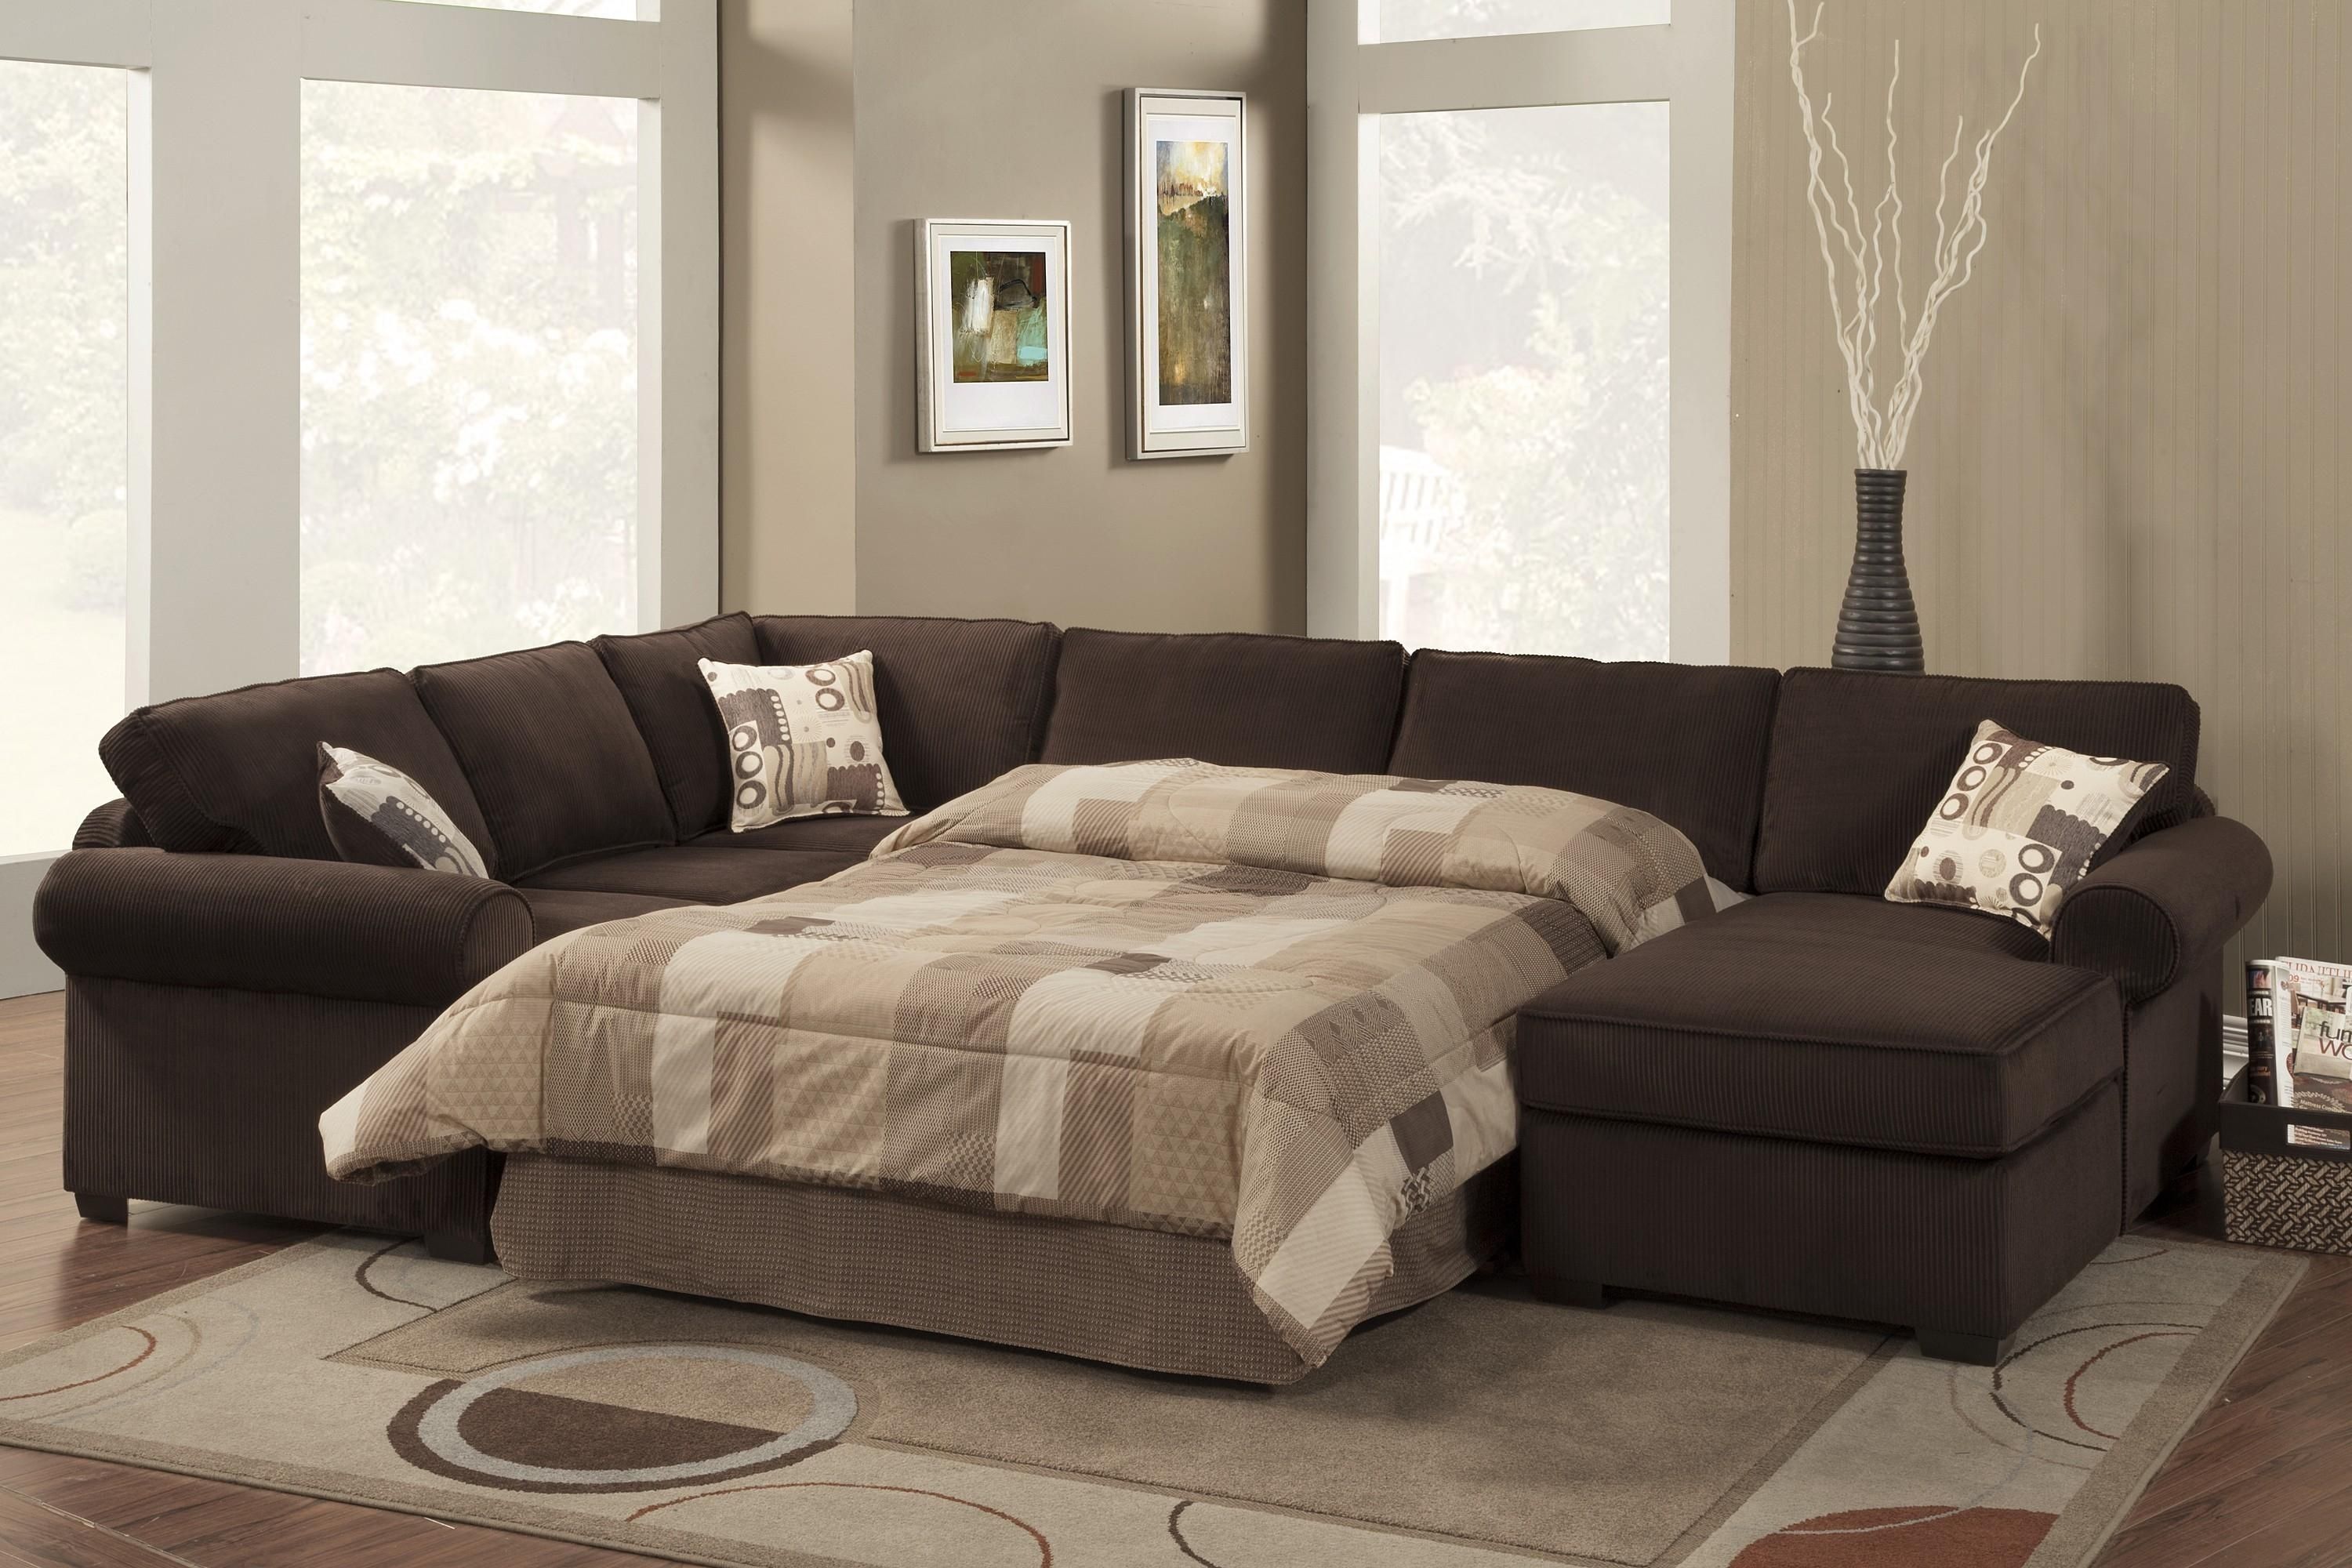 Sofa: Reclining Sectional | Wayfair Sectionals | Tufted Sectional Sofa Pertaining To Sleeper Recliner Sectional (View 4 of 20)